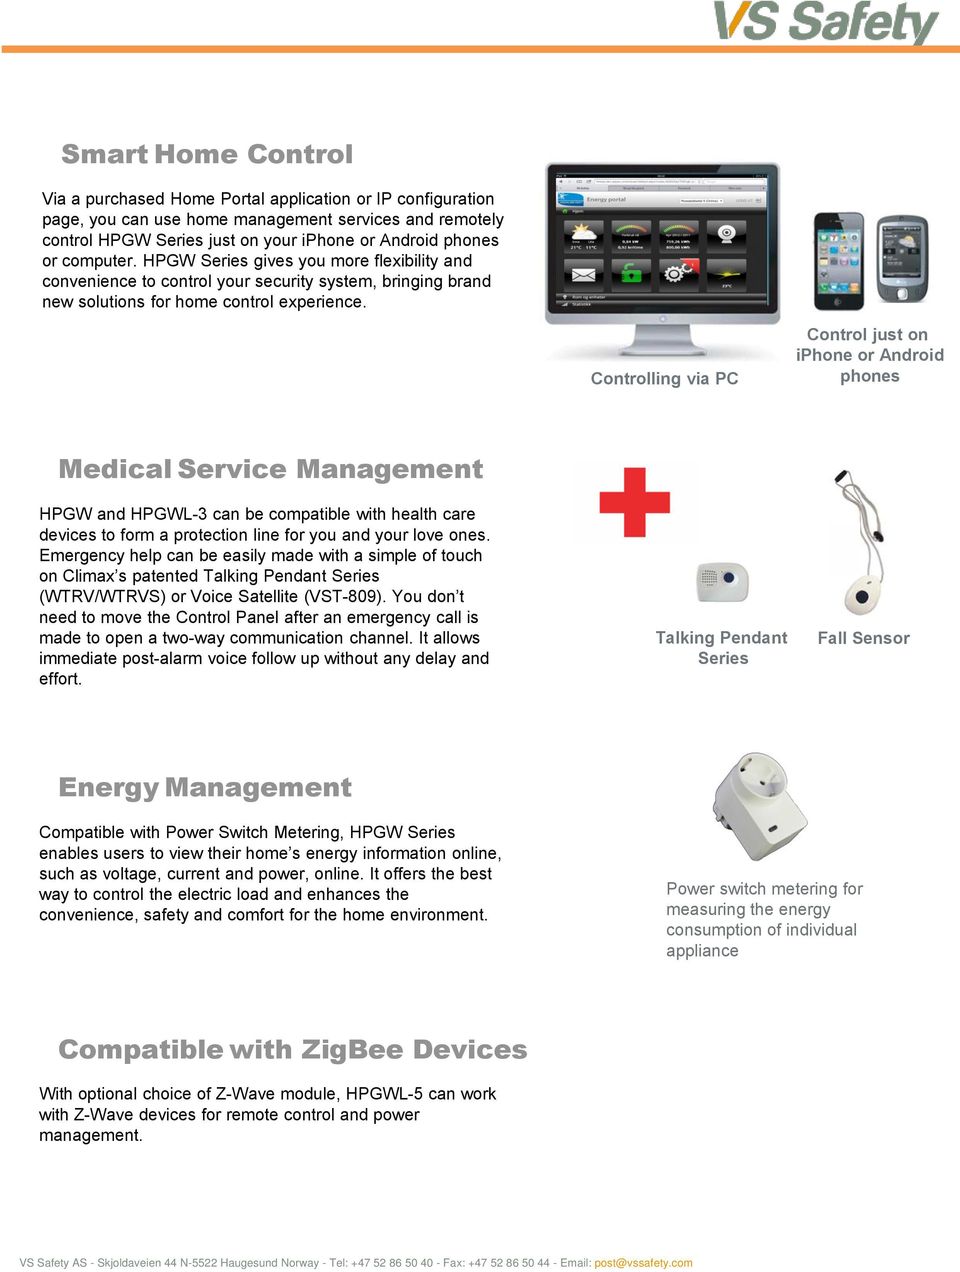 Controlling via PC Control just on iphone or Android phones Medical Service Management HPGW and HPGWL-3 can be compatible with health care devices to form a protection line for you and your love ones.